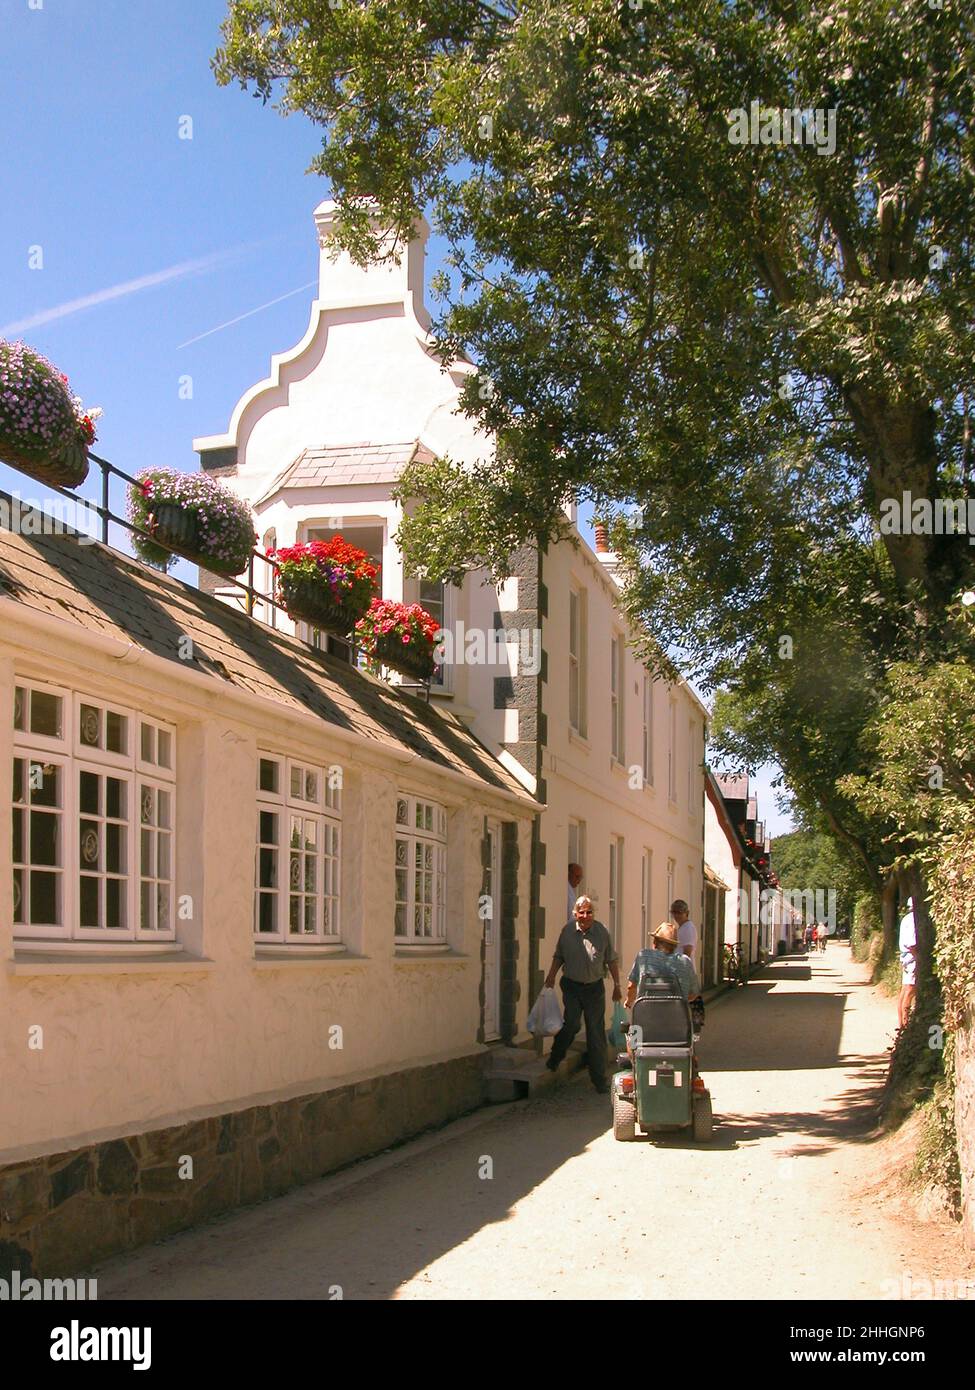 The Avenue, Sark's main street with shops and tourists in The Village, the centre of Sark, Bailiwick of Guernsey, Channel Islands. No cars or trucks are allowed on Sark. Stock Photo